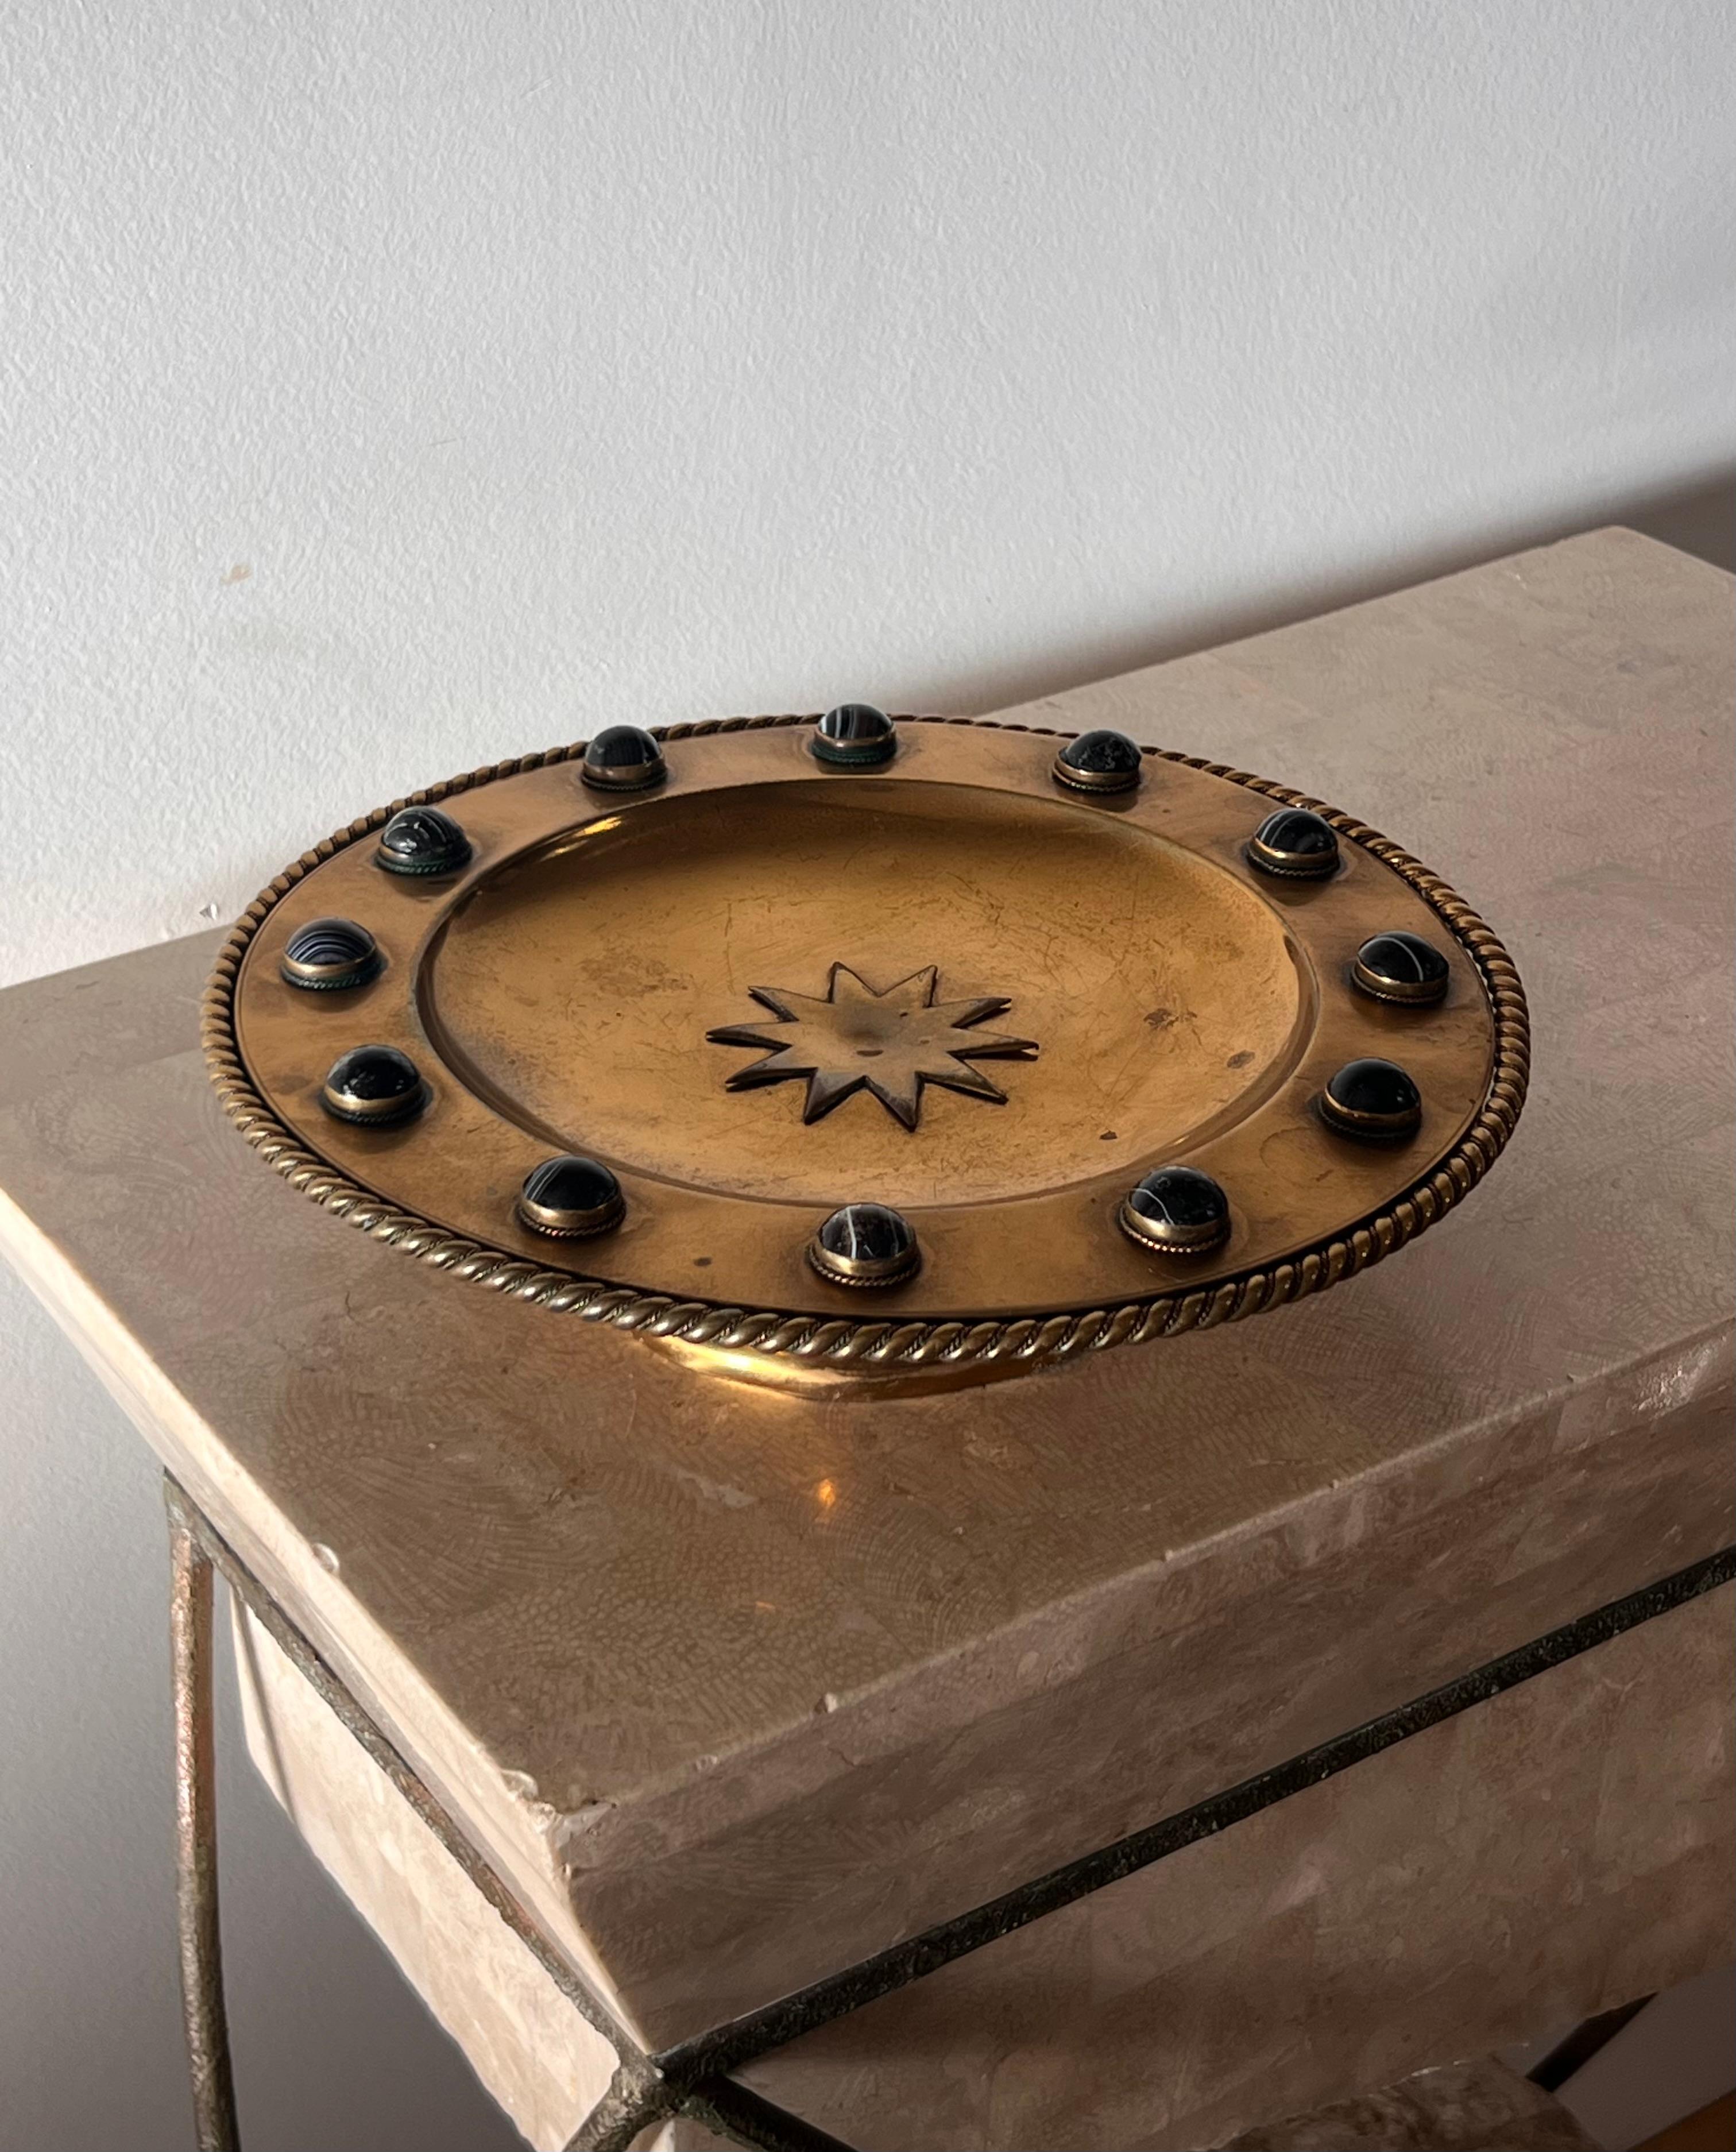 A bronze and copper hued brass platter or fruit bowl with braided edge, black onyx appliqués, and an embossed sun or star in center. Both Rococo and brutalist in temperament, this unique piece marries the hand-worked fastidiousness of brutalism with